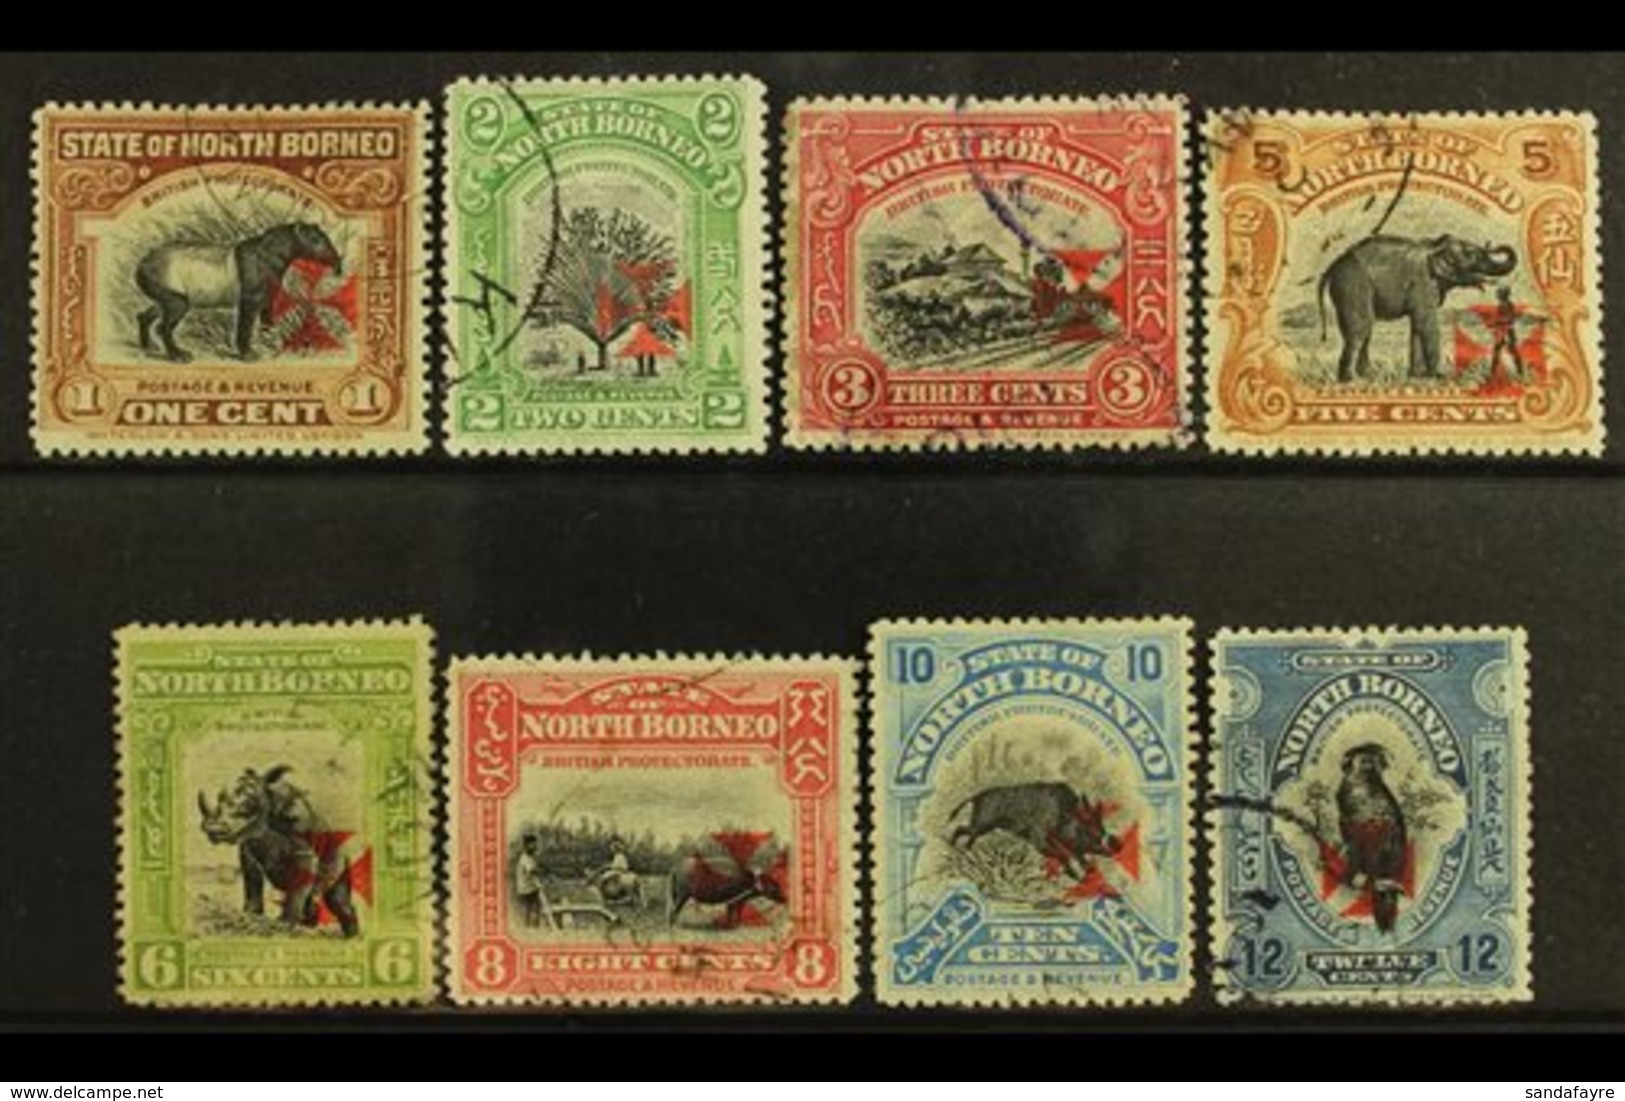 1916  Red Cross Overprints In Carmine Set To 12c (no 4c Carmine), SG 202/209 (no 204a), Very Fine Used. (8 Stamps) For M - Nordborneo (...-1963)